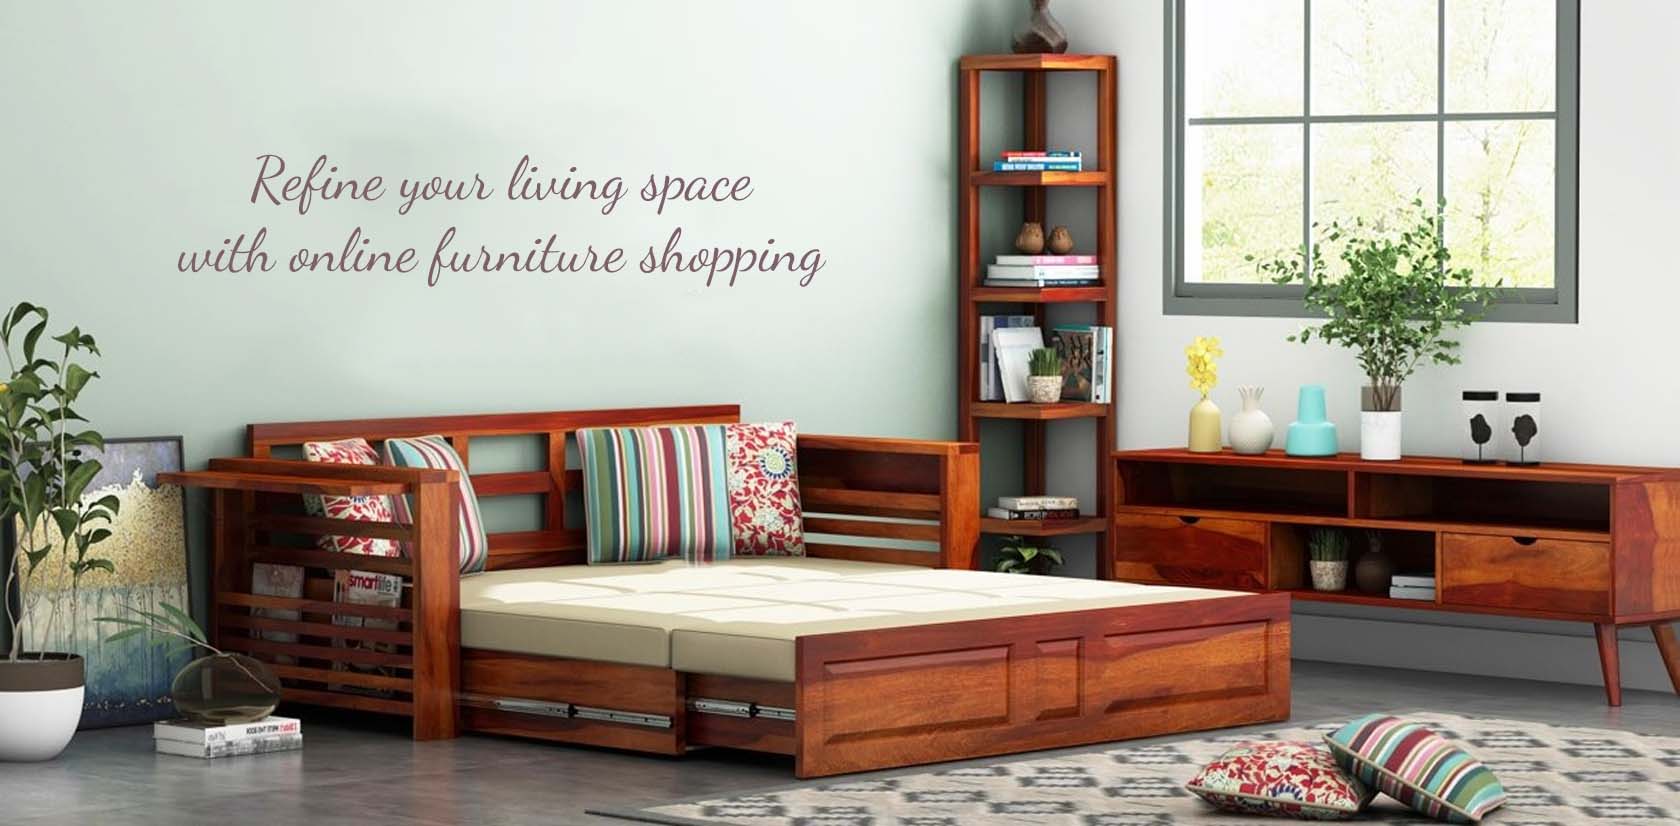 Why Purchase Furniture Online? | My Decorative